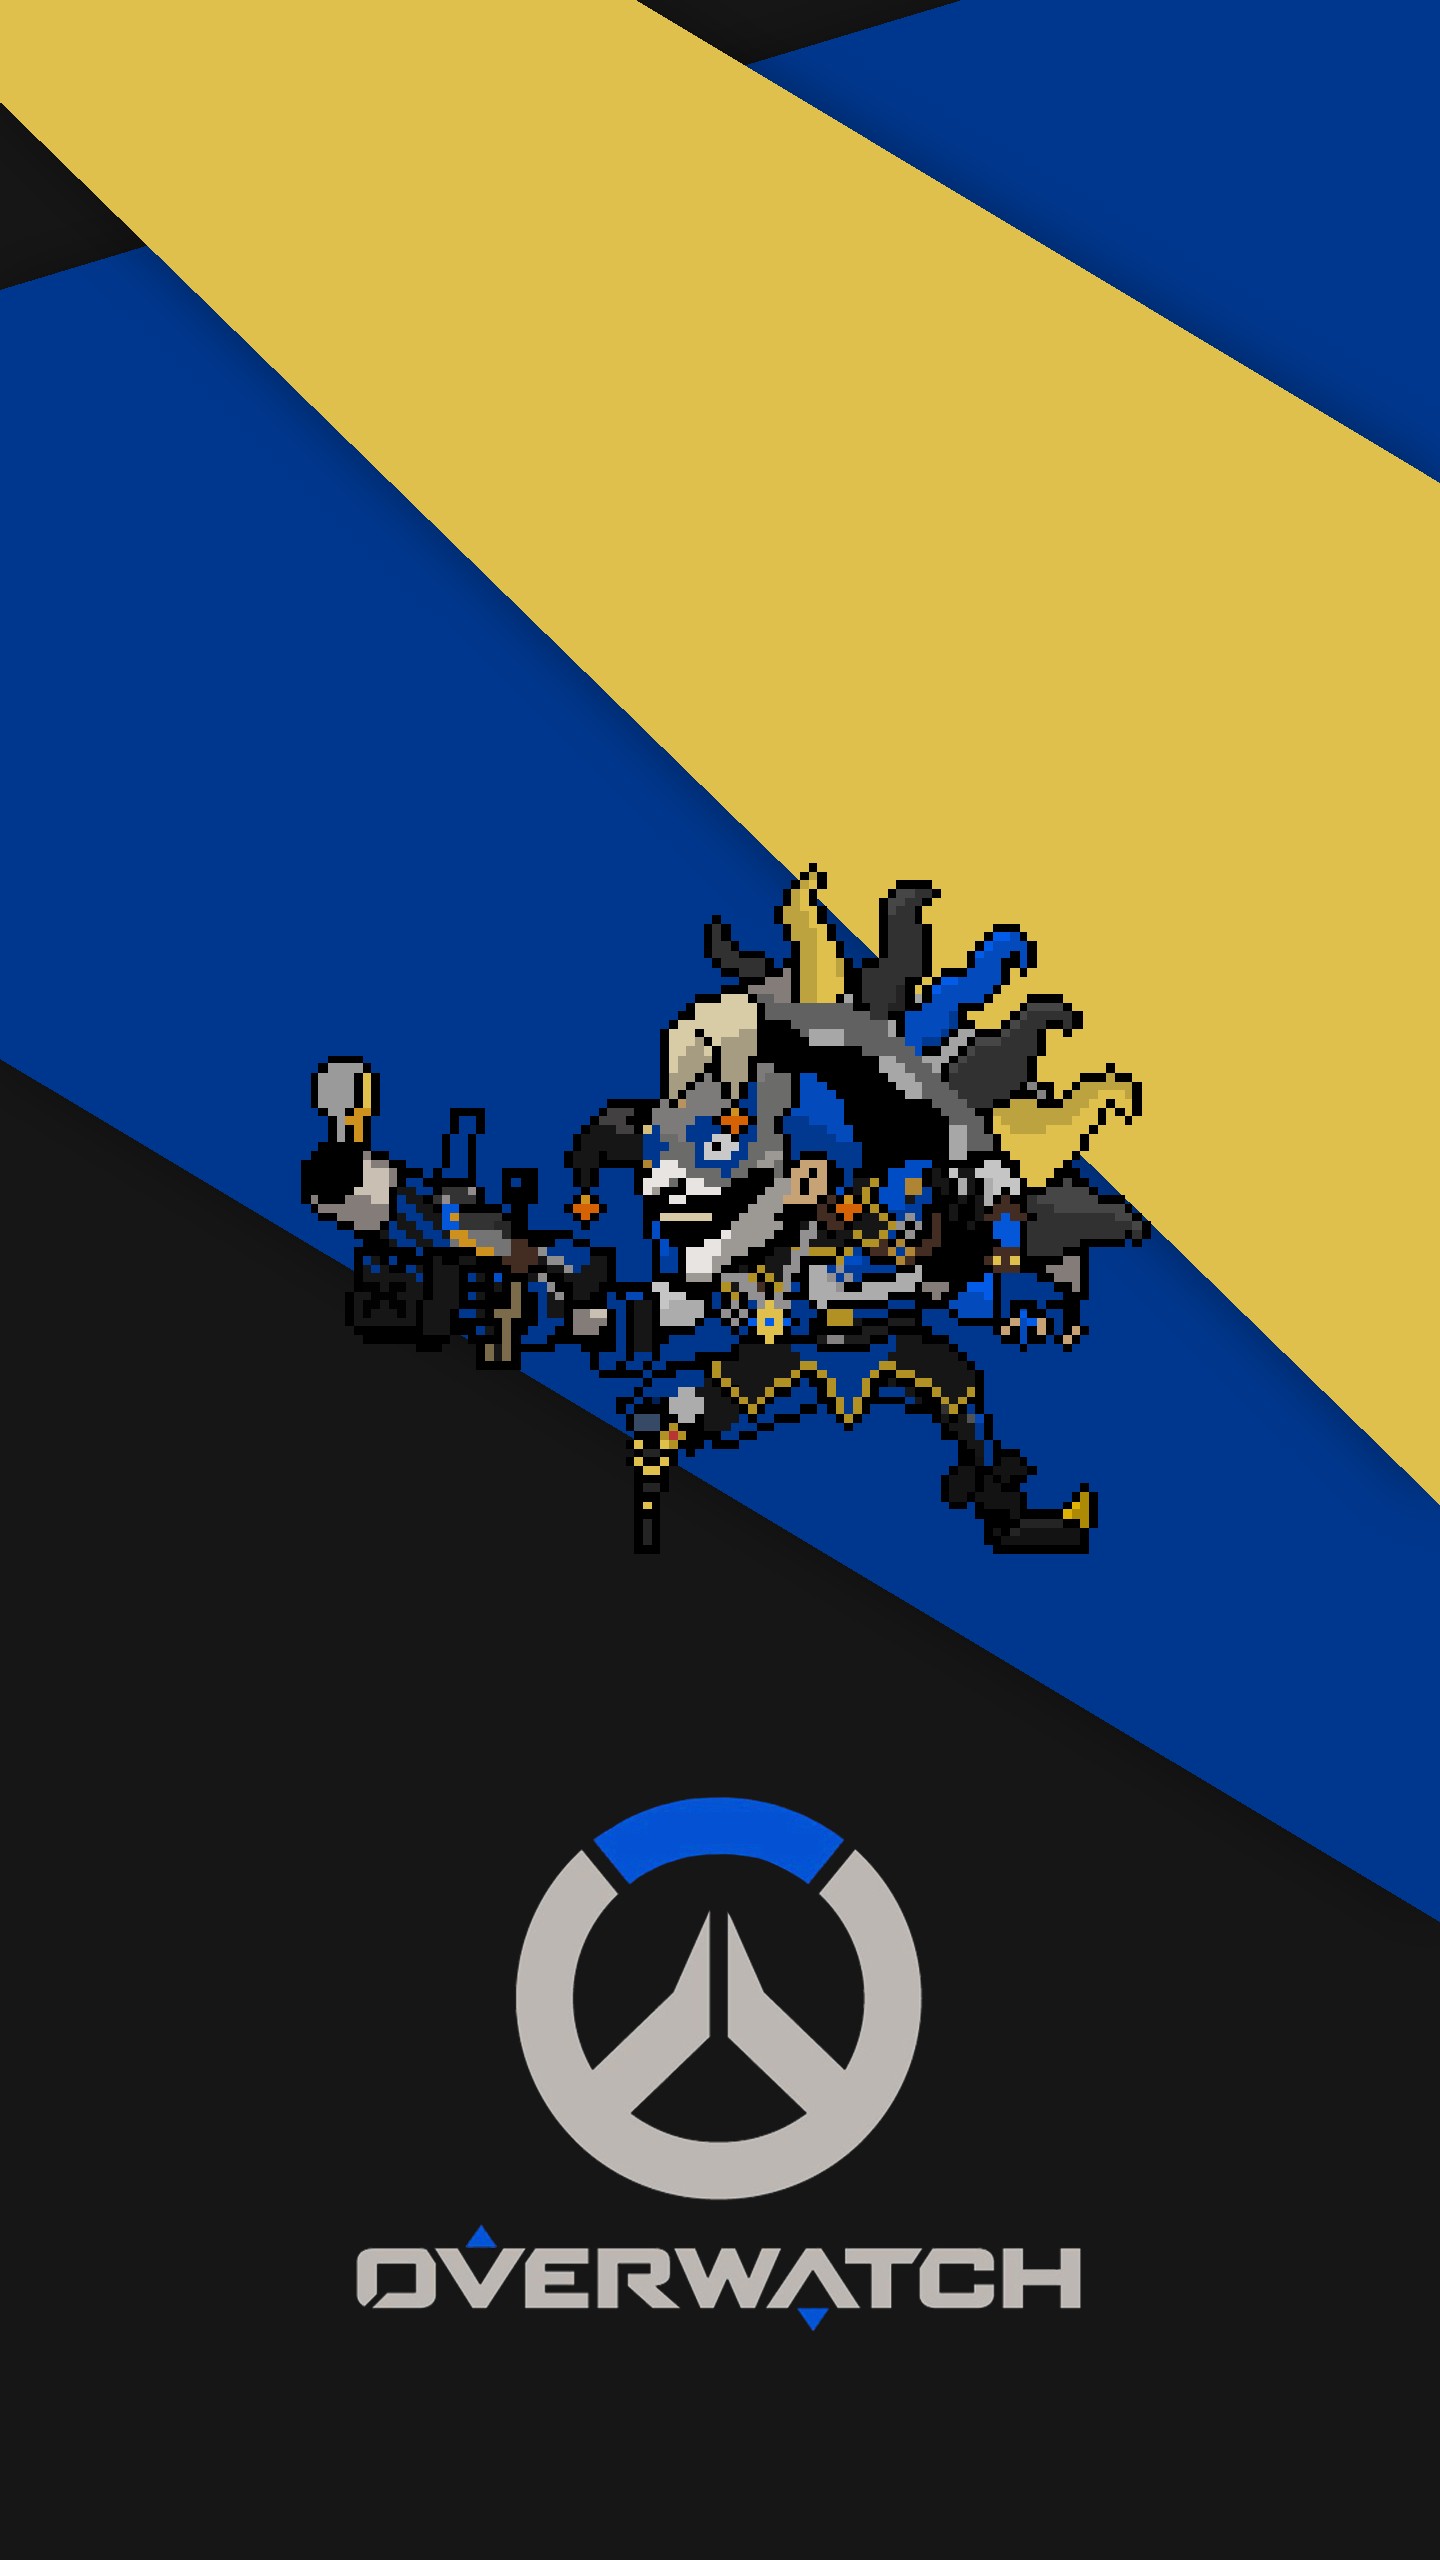 20 Overwatch  phone wallpapers    Download free cool HD 